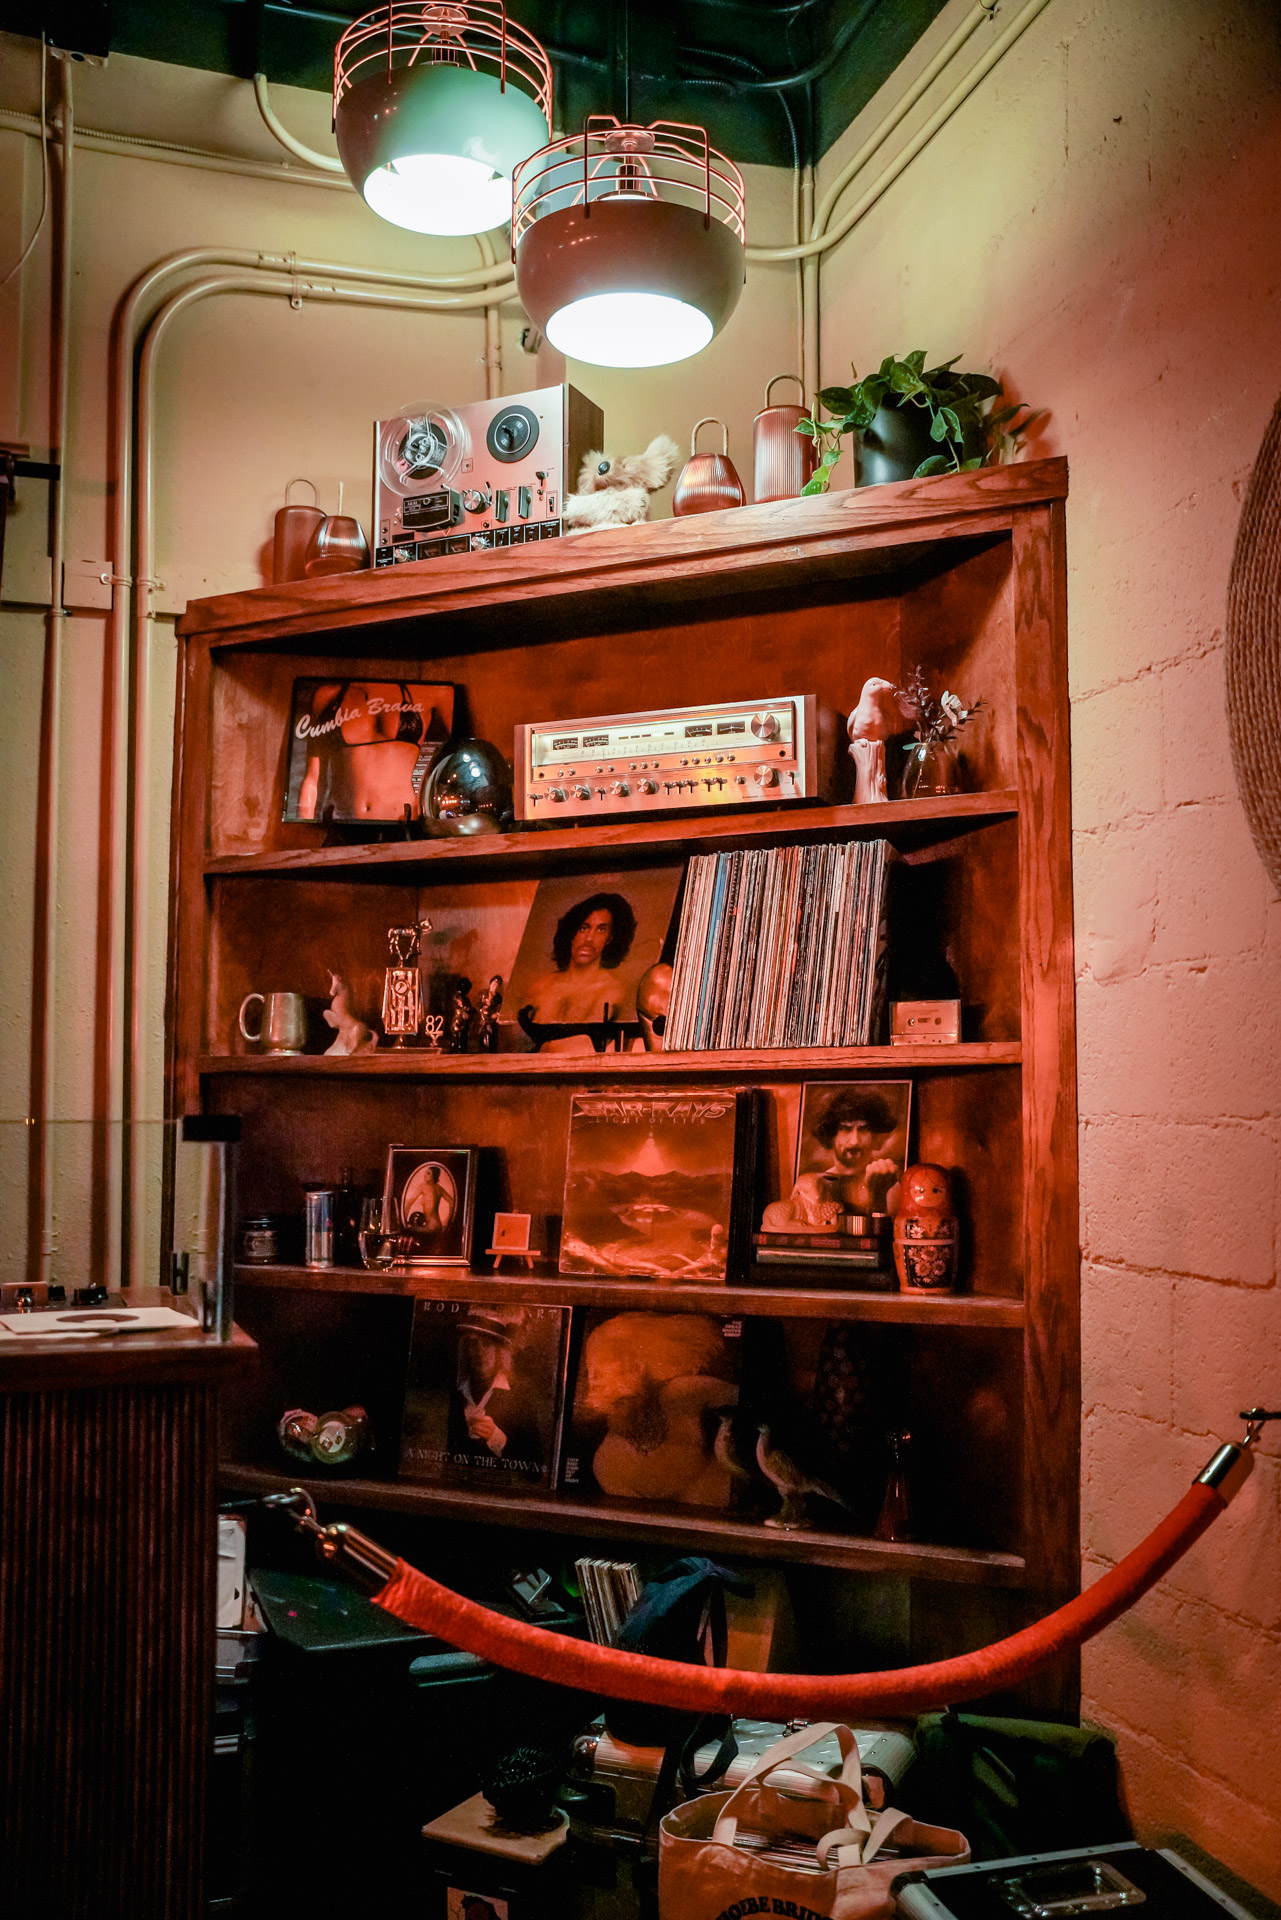 A shelf with vinyl records and trinkets